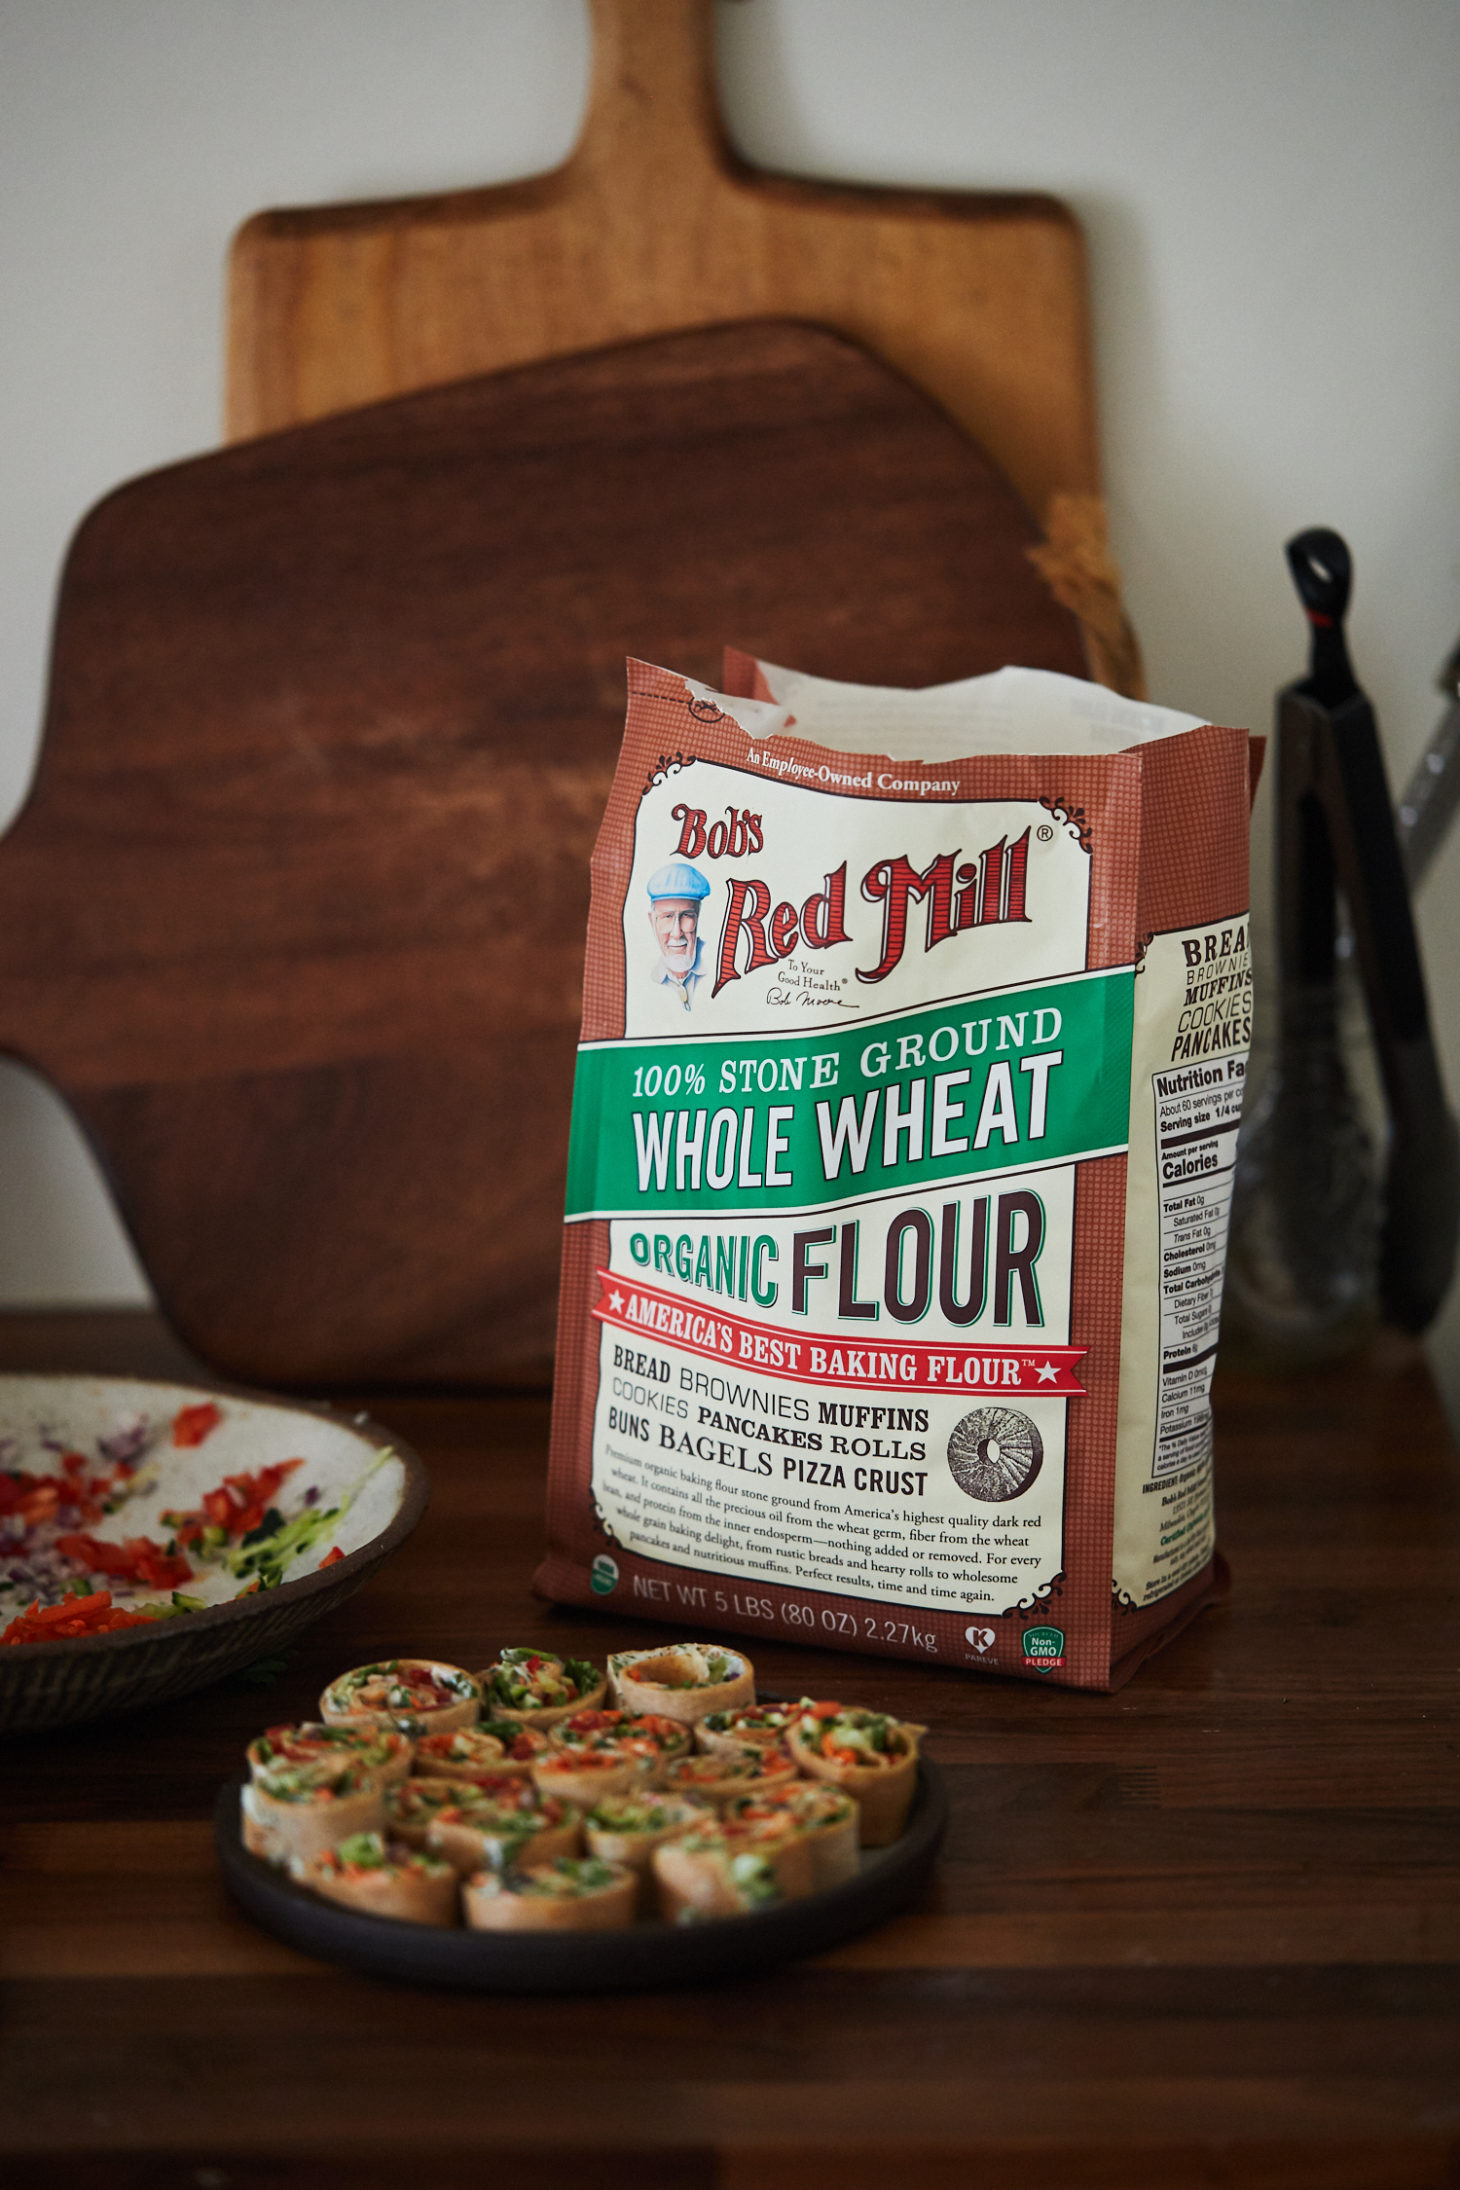 A straight-on photograph of a bag of bob's red mill whole wheat flour.